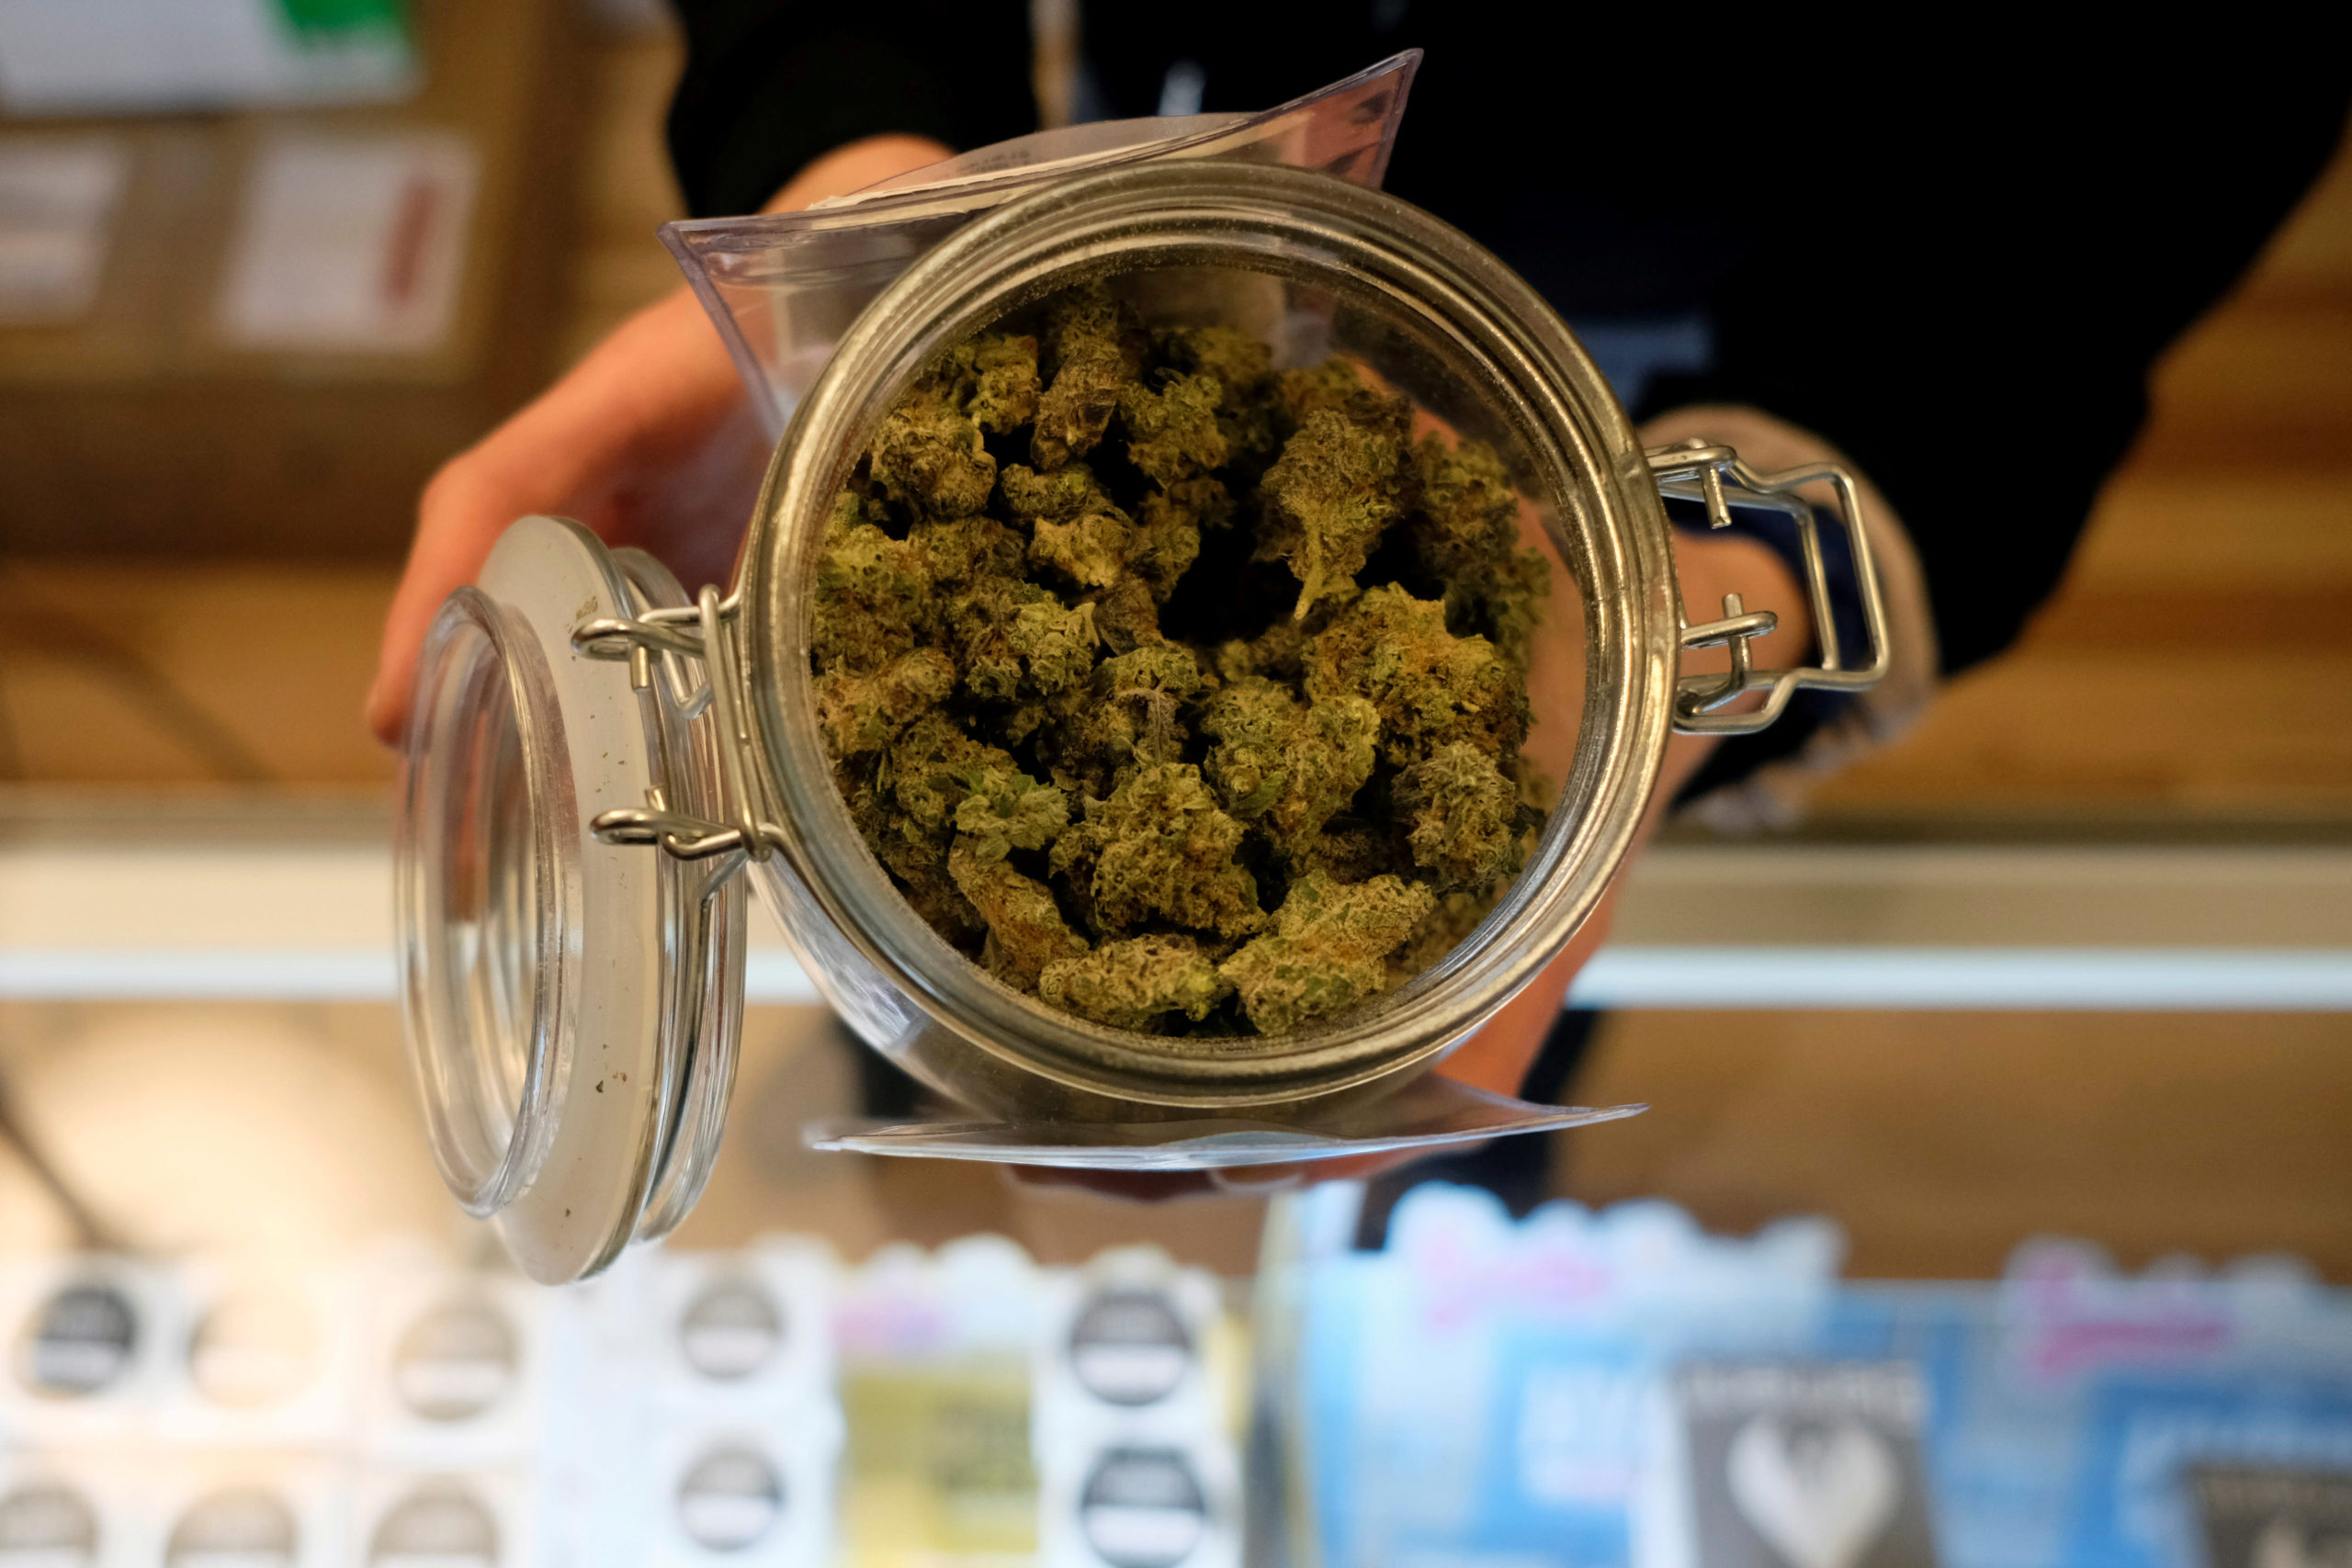 Illinois rings in new yr with its first authorized leisure marijuana gross sales